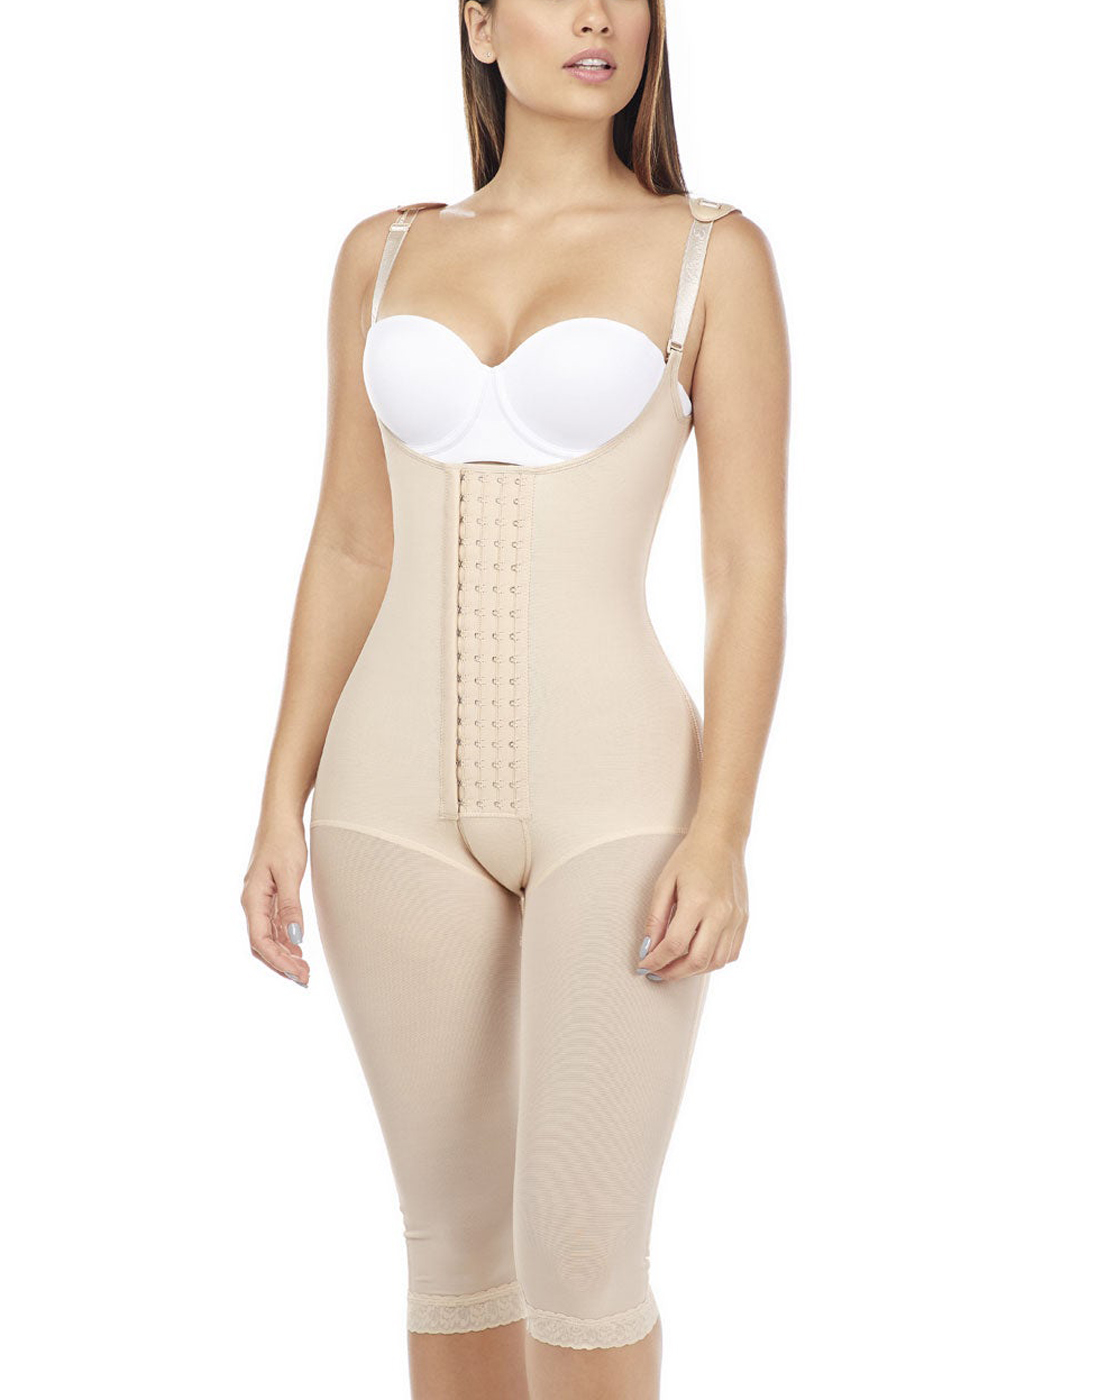 Postoperative Women's Shapewear with Shoulder Pads